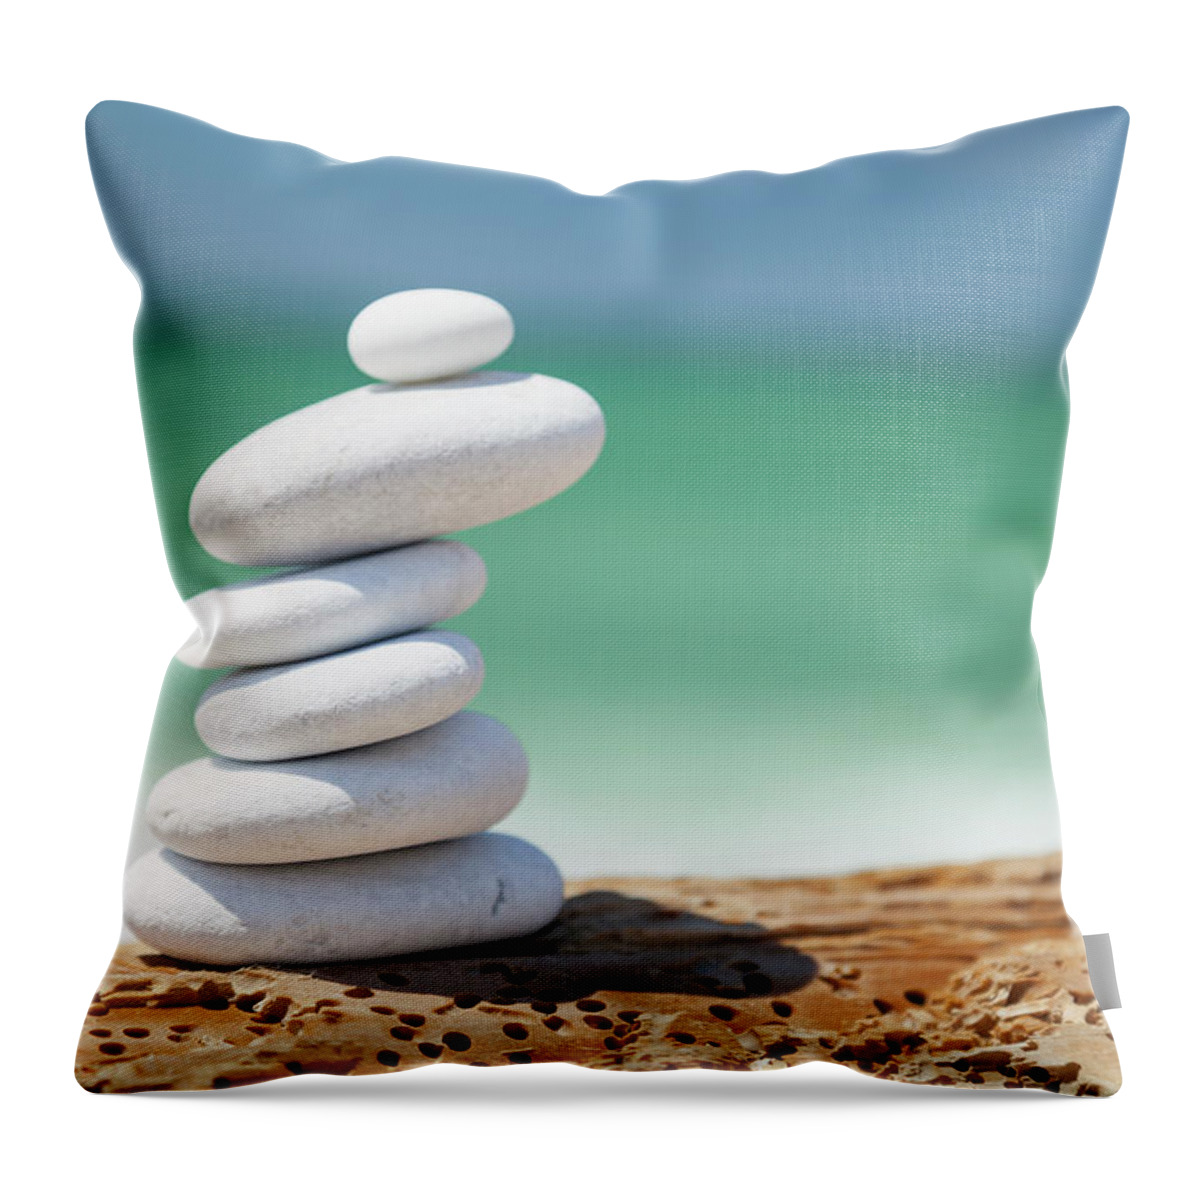 Toughness Throw Pillow featuring the photograph Pebbles At The Beach by Focusstock